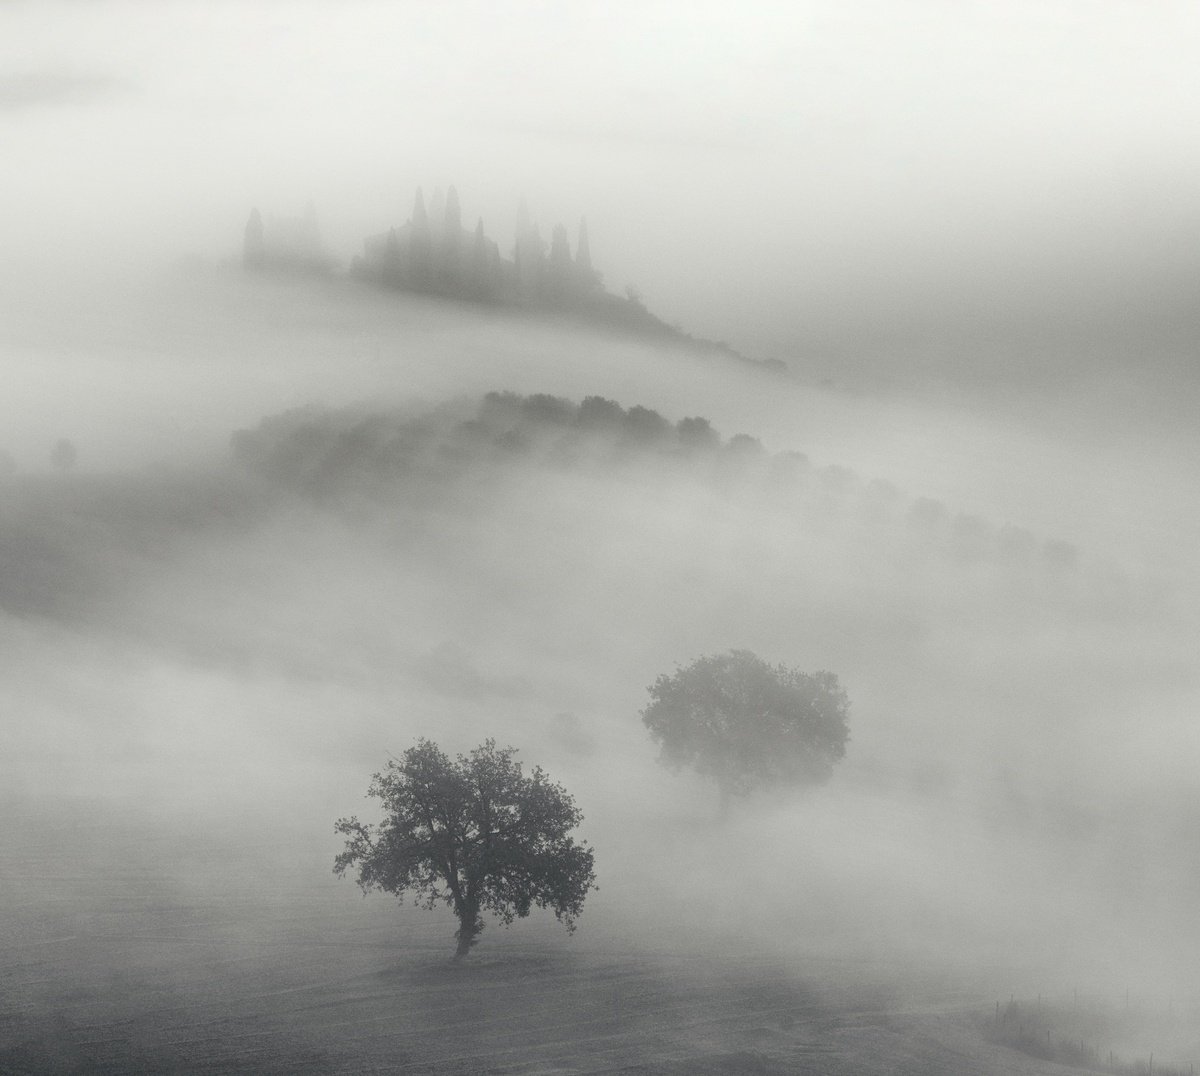 Two trees, 2021. ?Tuscany. Misty Land? collection by Pavel Oskin